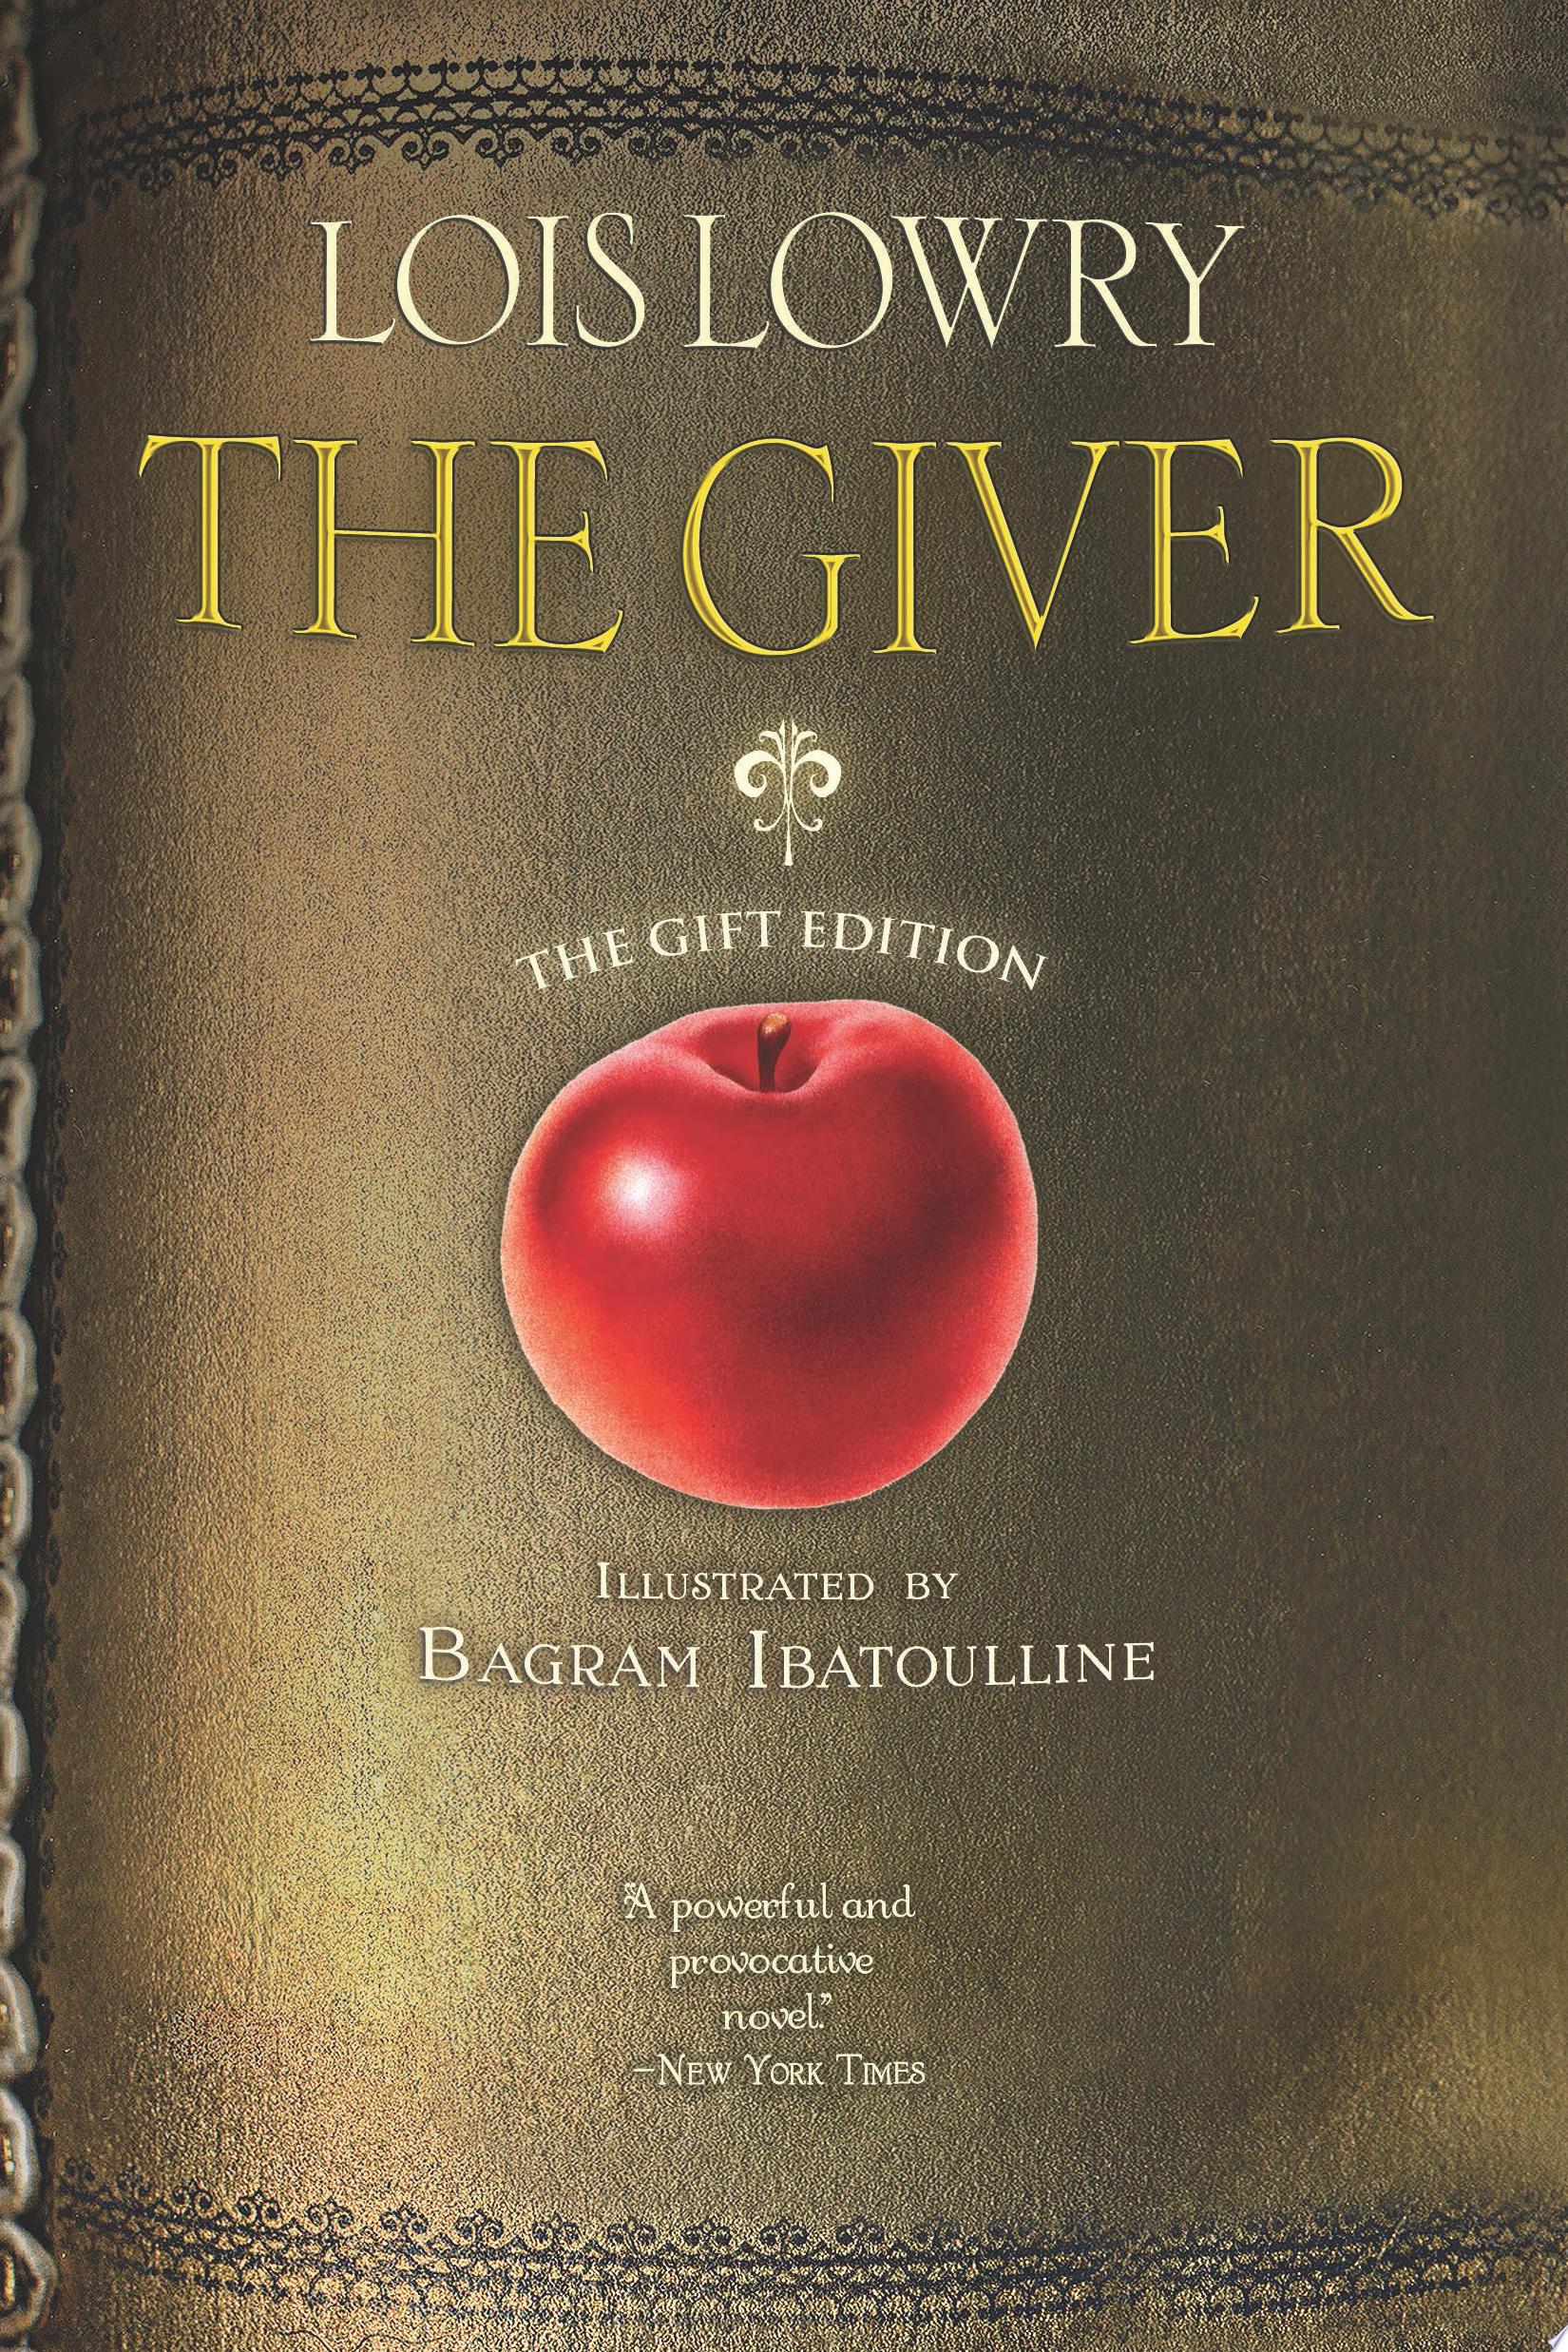 Image for "The Giver"